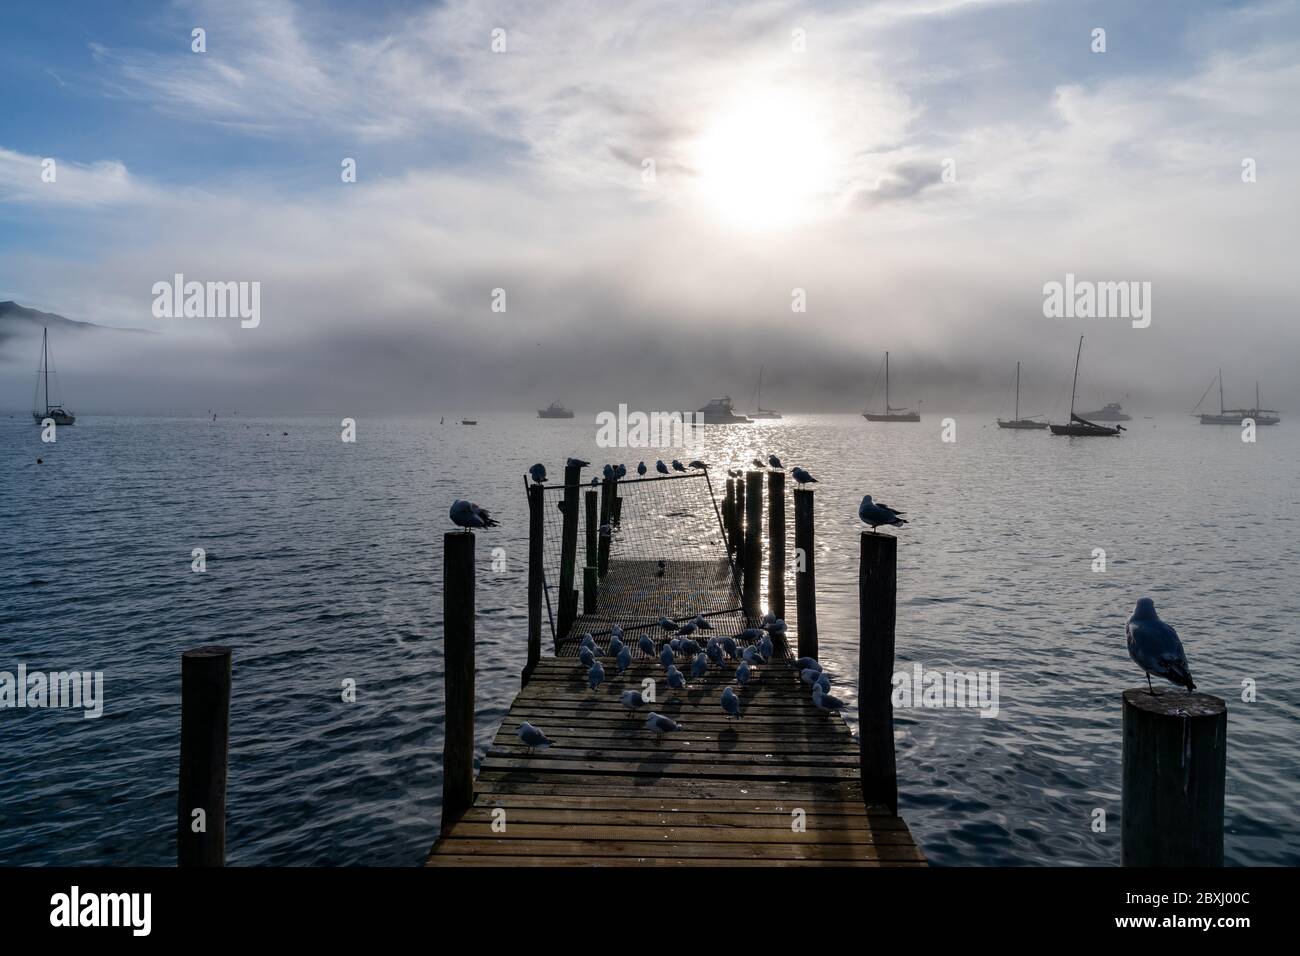 Wooden pier and sailboat at Akaroa harbor, New Zealand. Clear sky with a few white clouds and mist. Symbol for relaxation, wealth, leisure activity. P Stock Photo